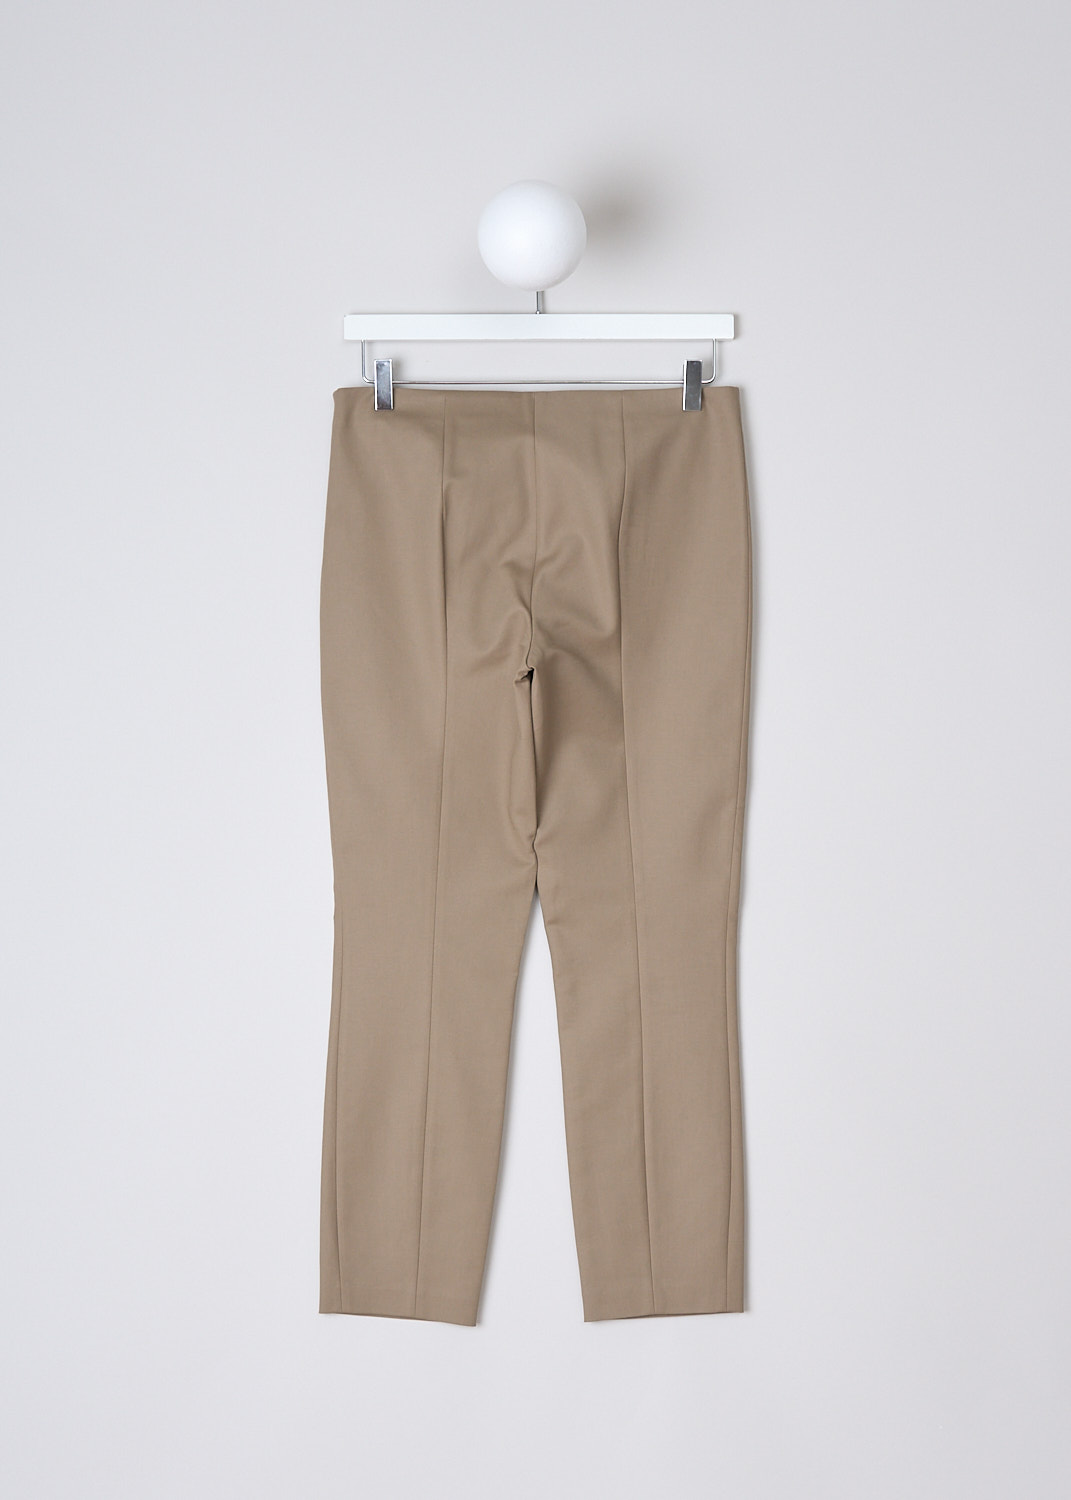 THE ROW, SOROC PANTS IN SEPIA, SOROC_PANT_396W580_SEPIA, Beige, Back, These straight fitted Soroc pants in Sepia have a high waist and ankle length pant legs with centre seams in the back. A concealed zipper on one side function as the closure. 